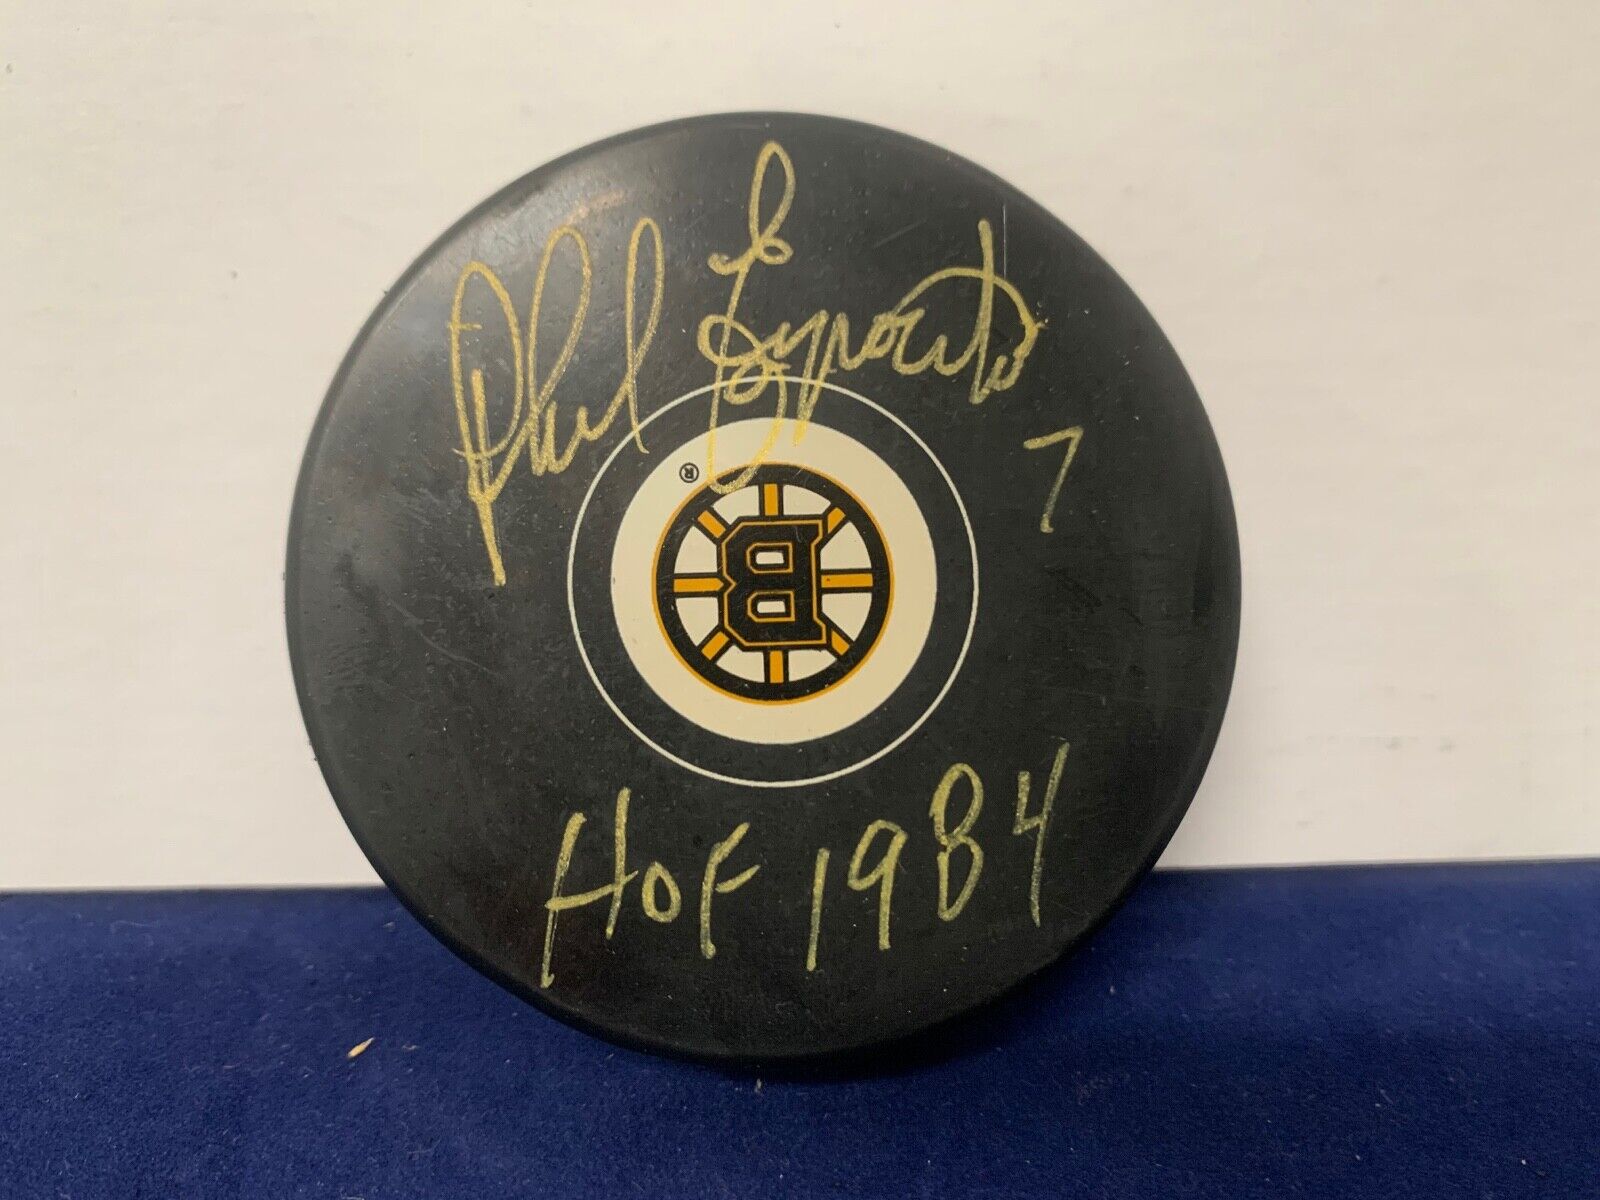 Phil Esposito Autographed Signed Boston Bruins Hockey Puck B with PSA COA